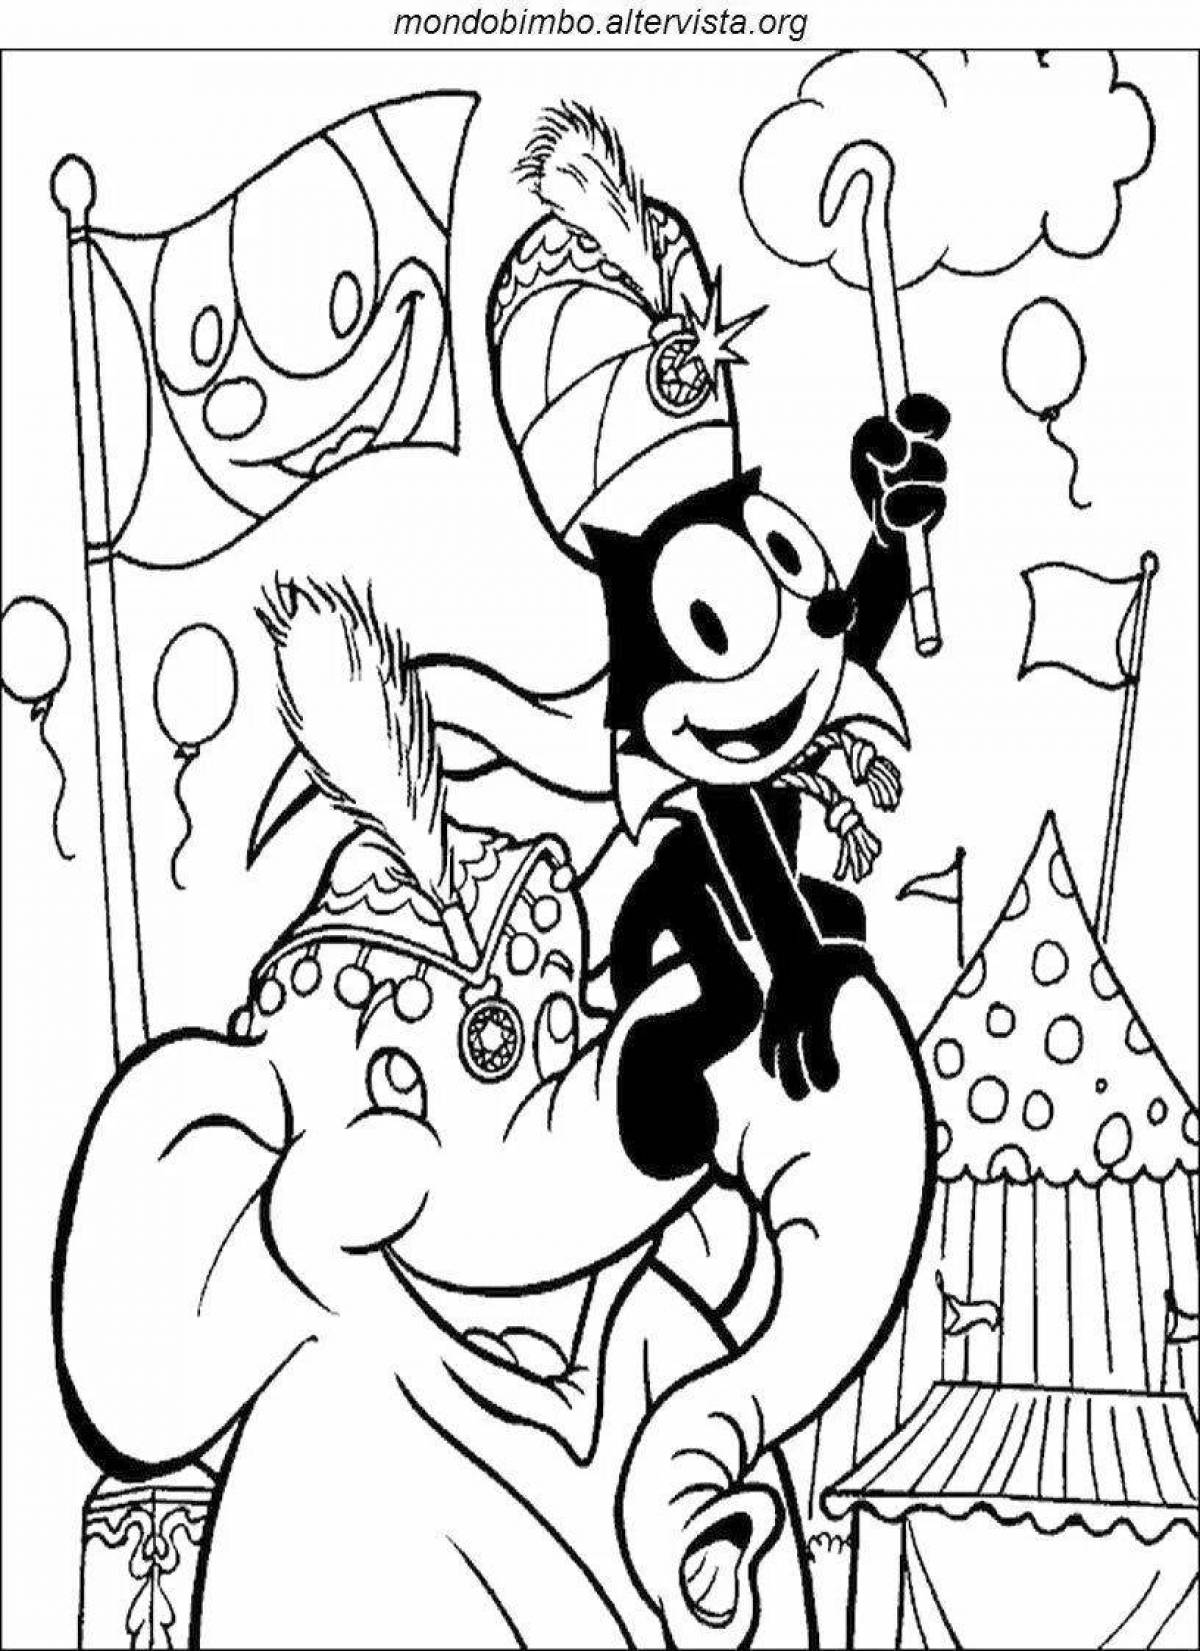 Felix jolly coloring page